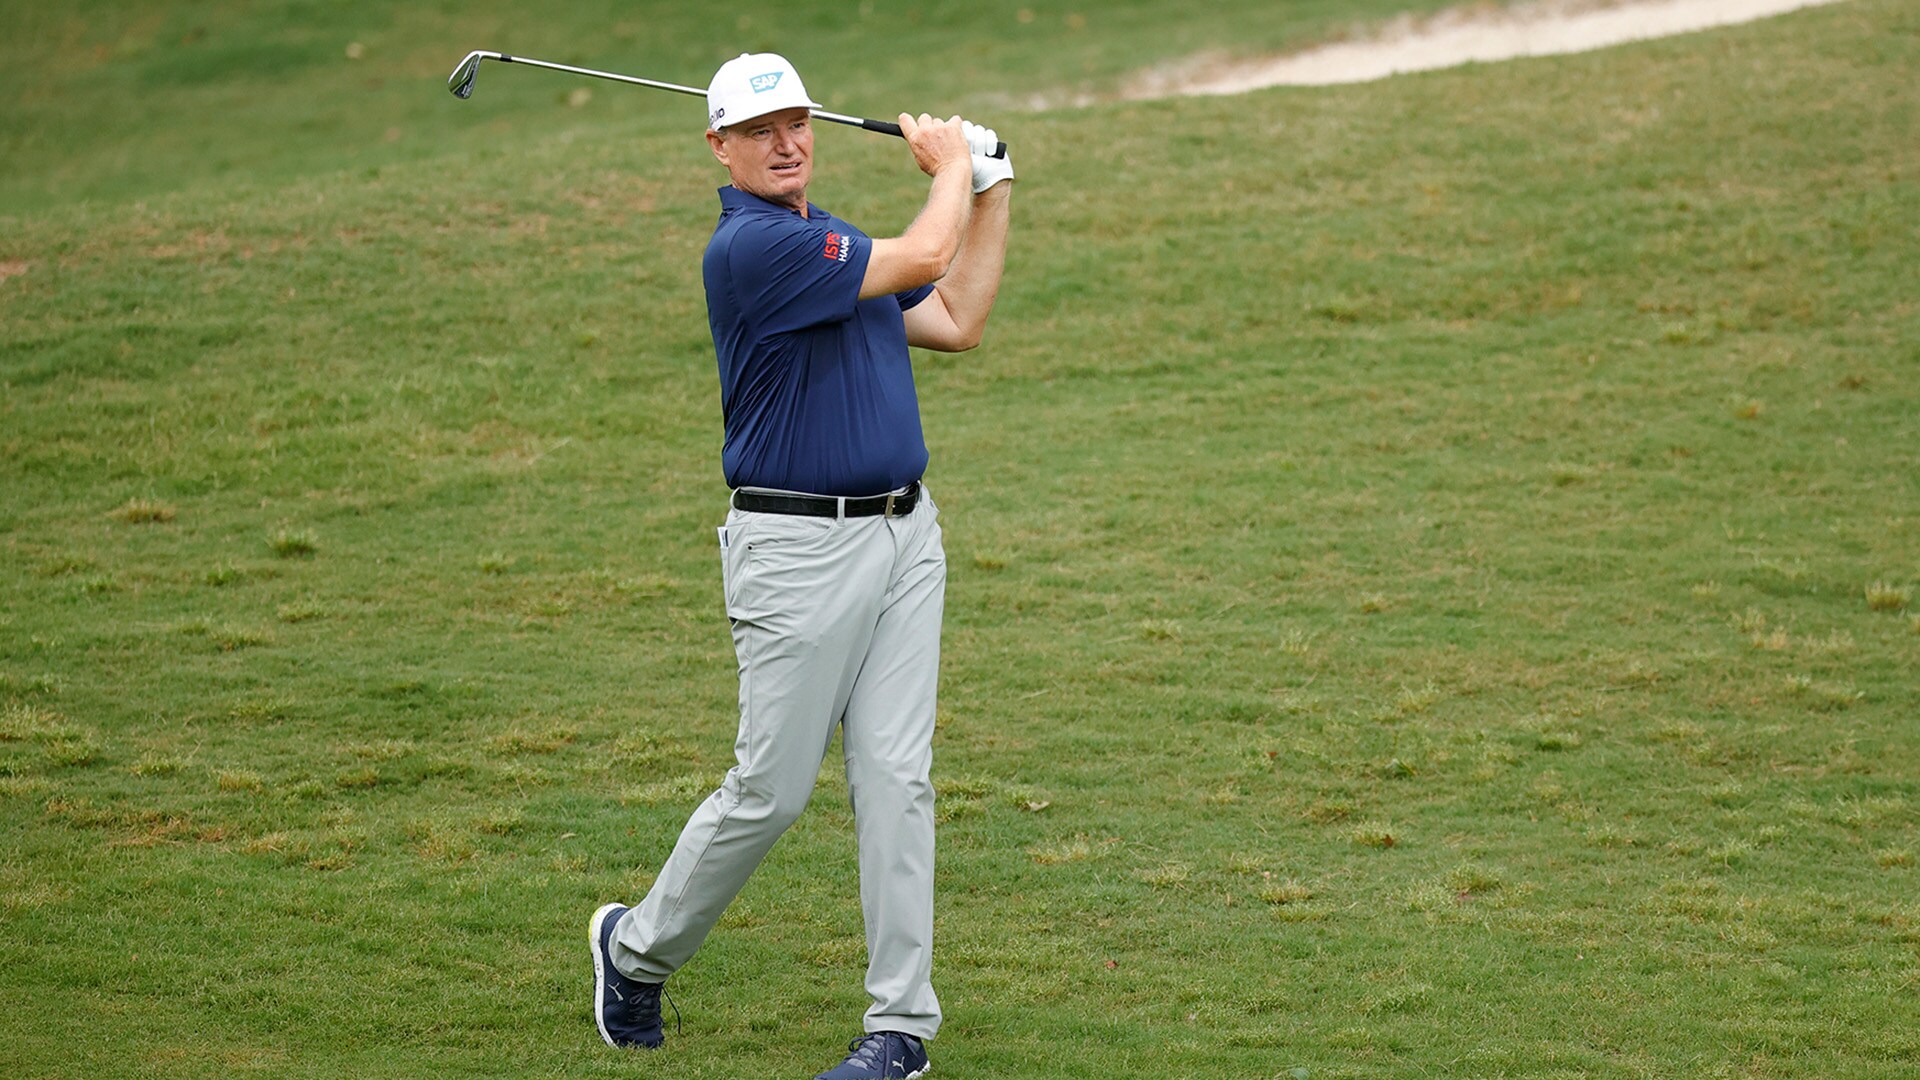 Ernie Els takes Regions Tradition lead with 66; Steve Stricker two back